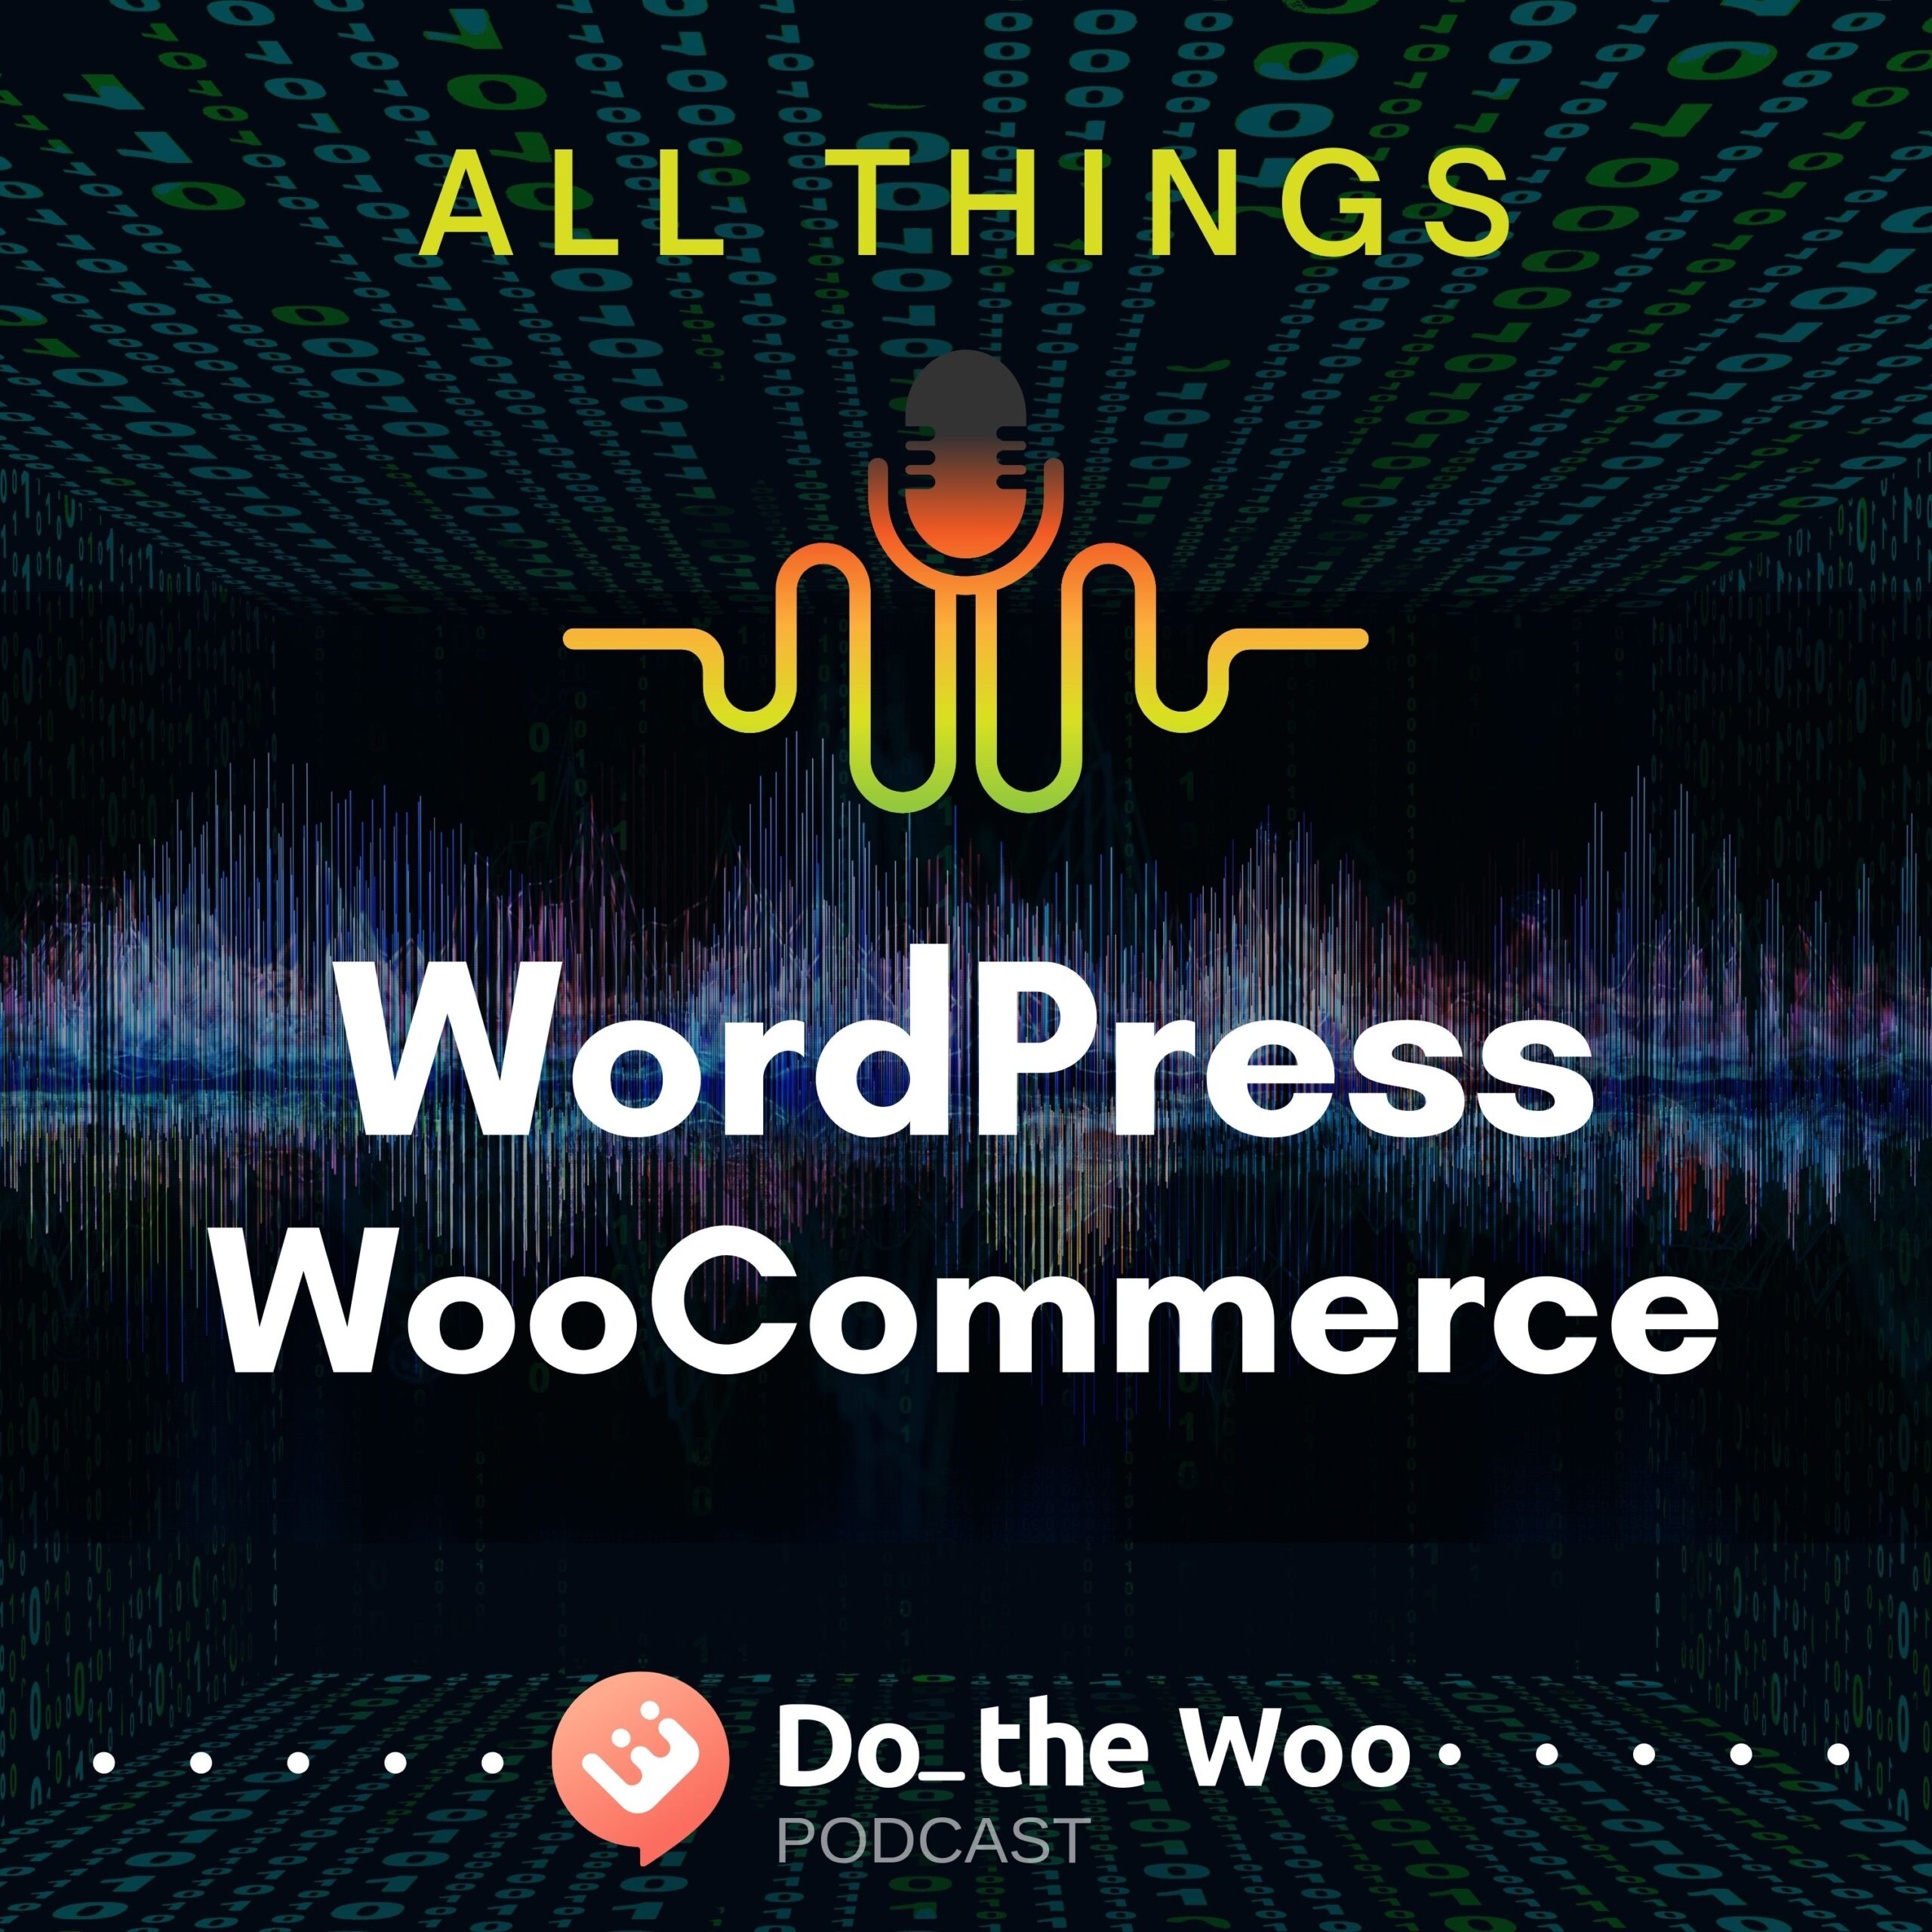 All Things WordPress and WooCommerce